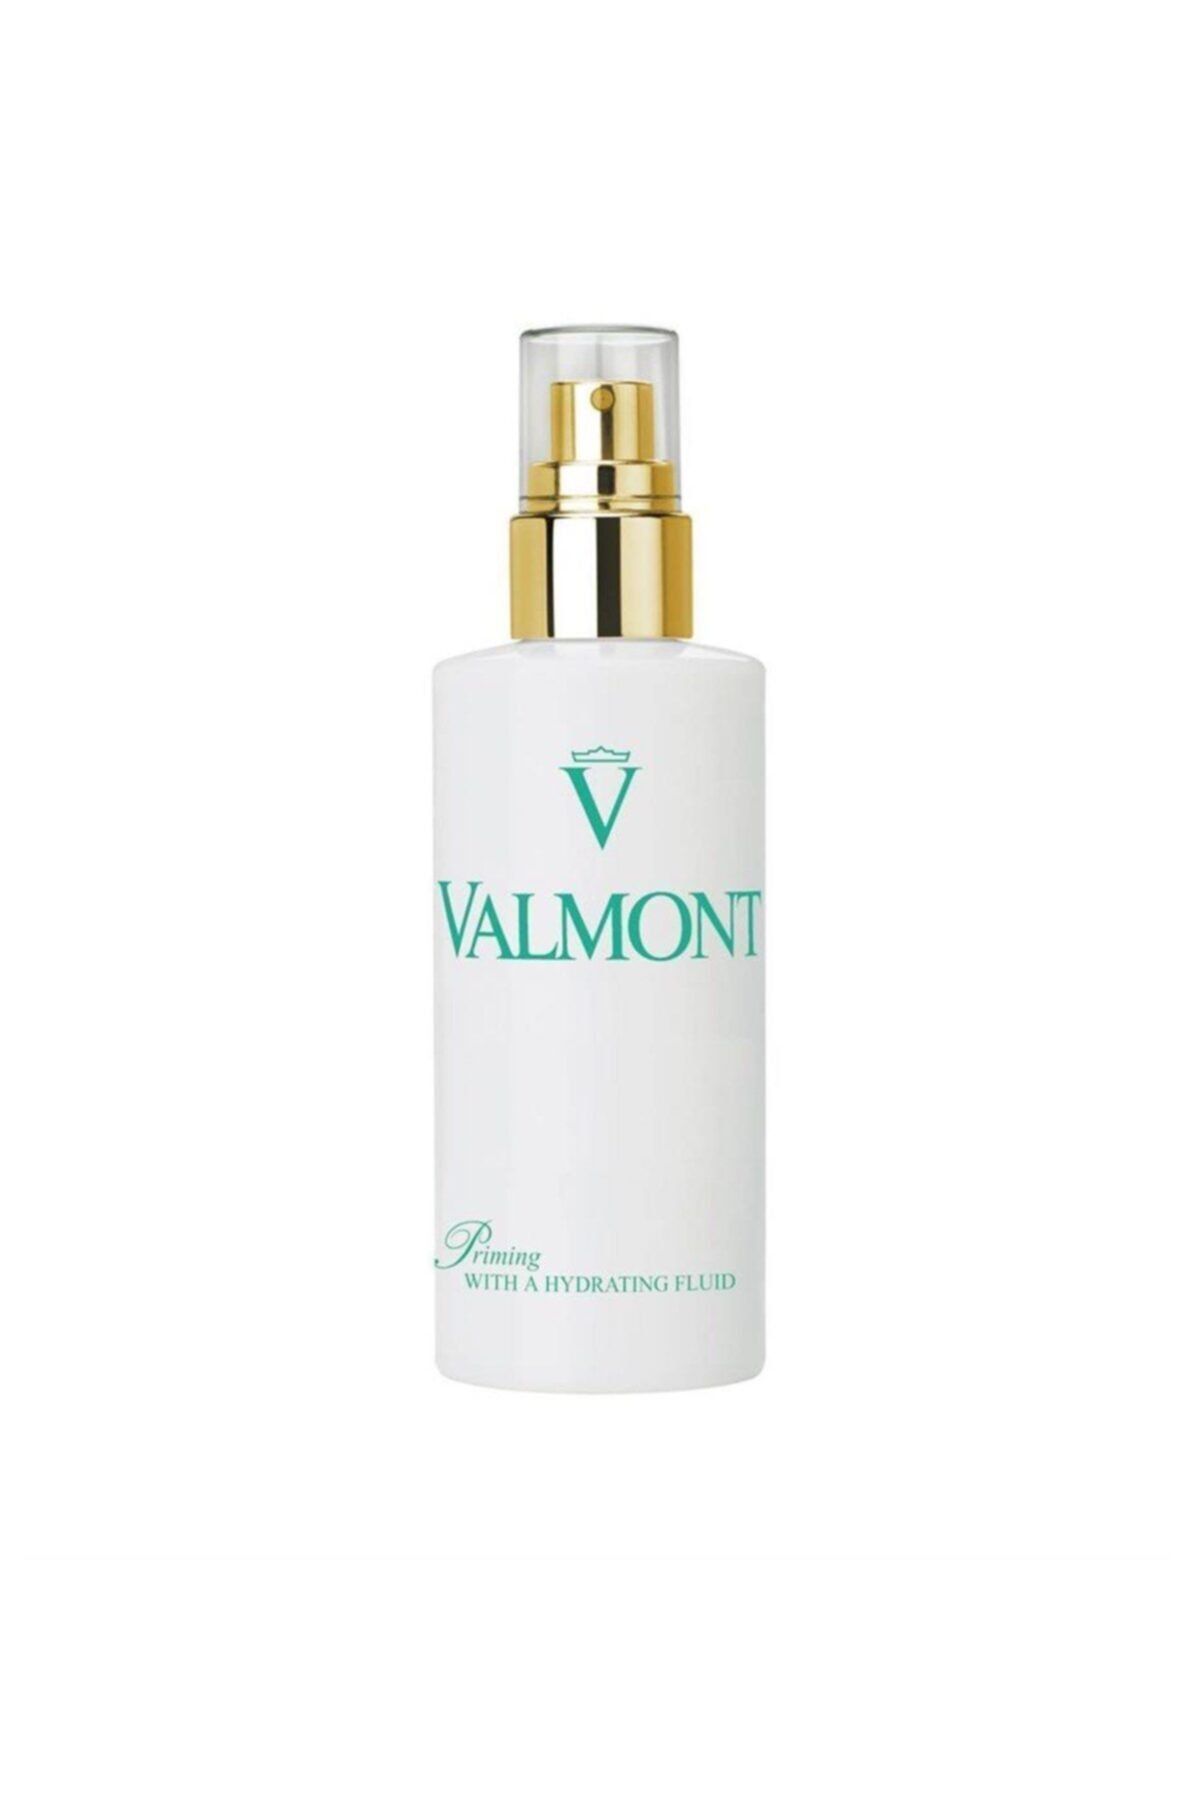 Valmont Priming With A Hydrating Fluid 150 ml 7612017050058